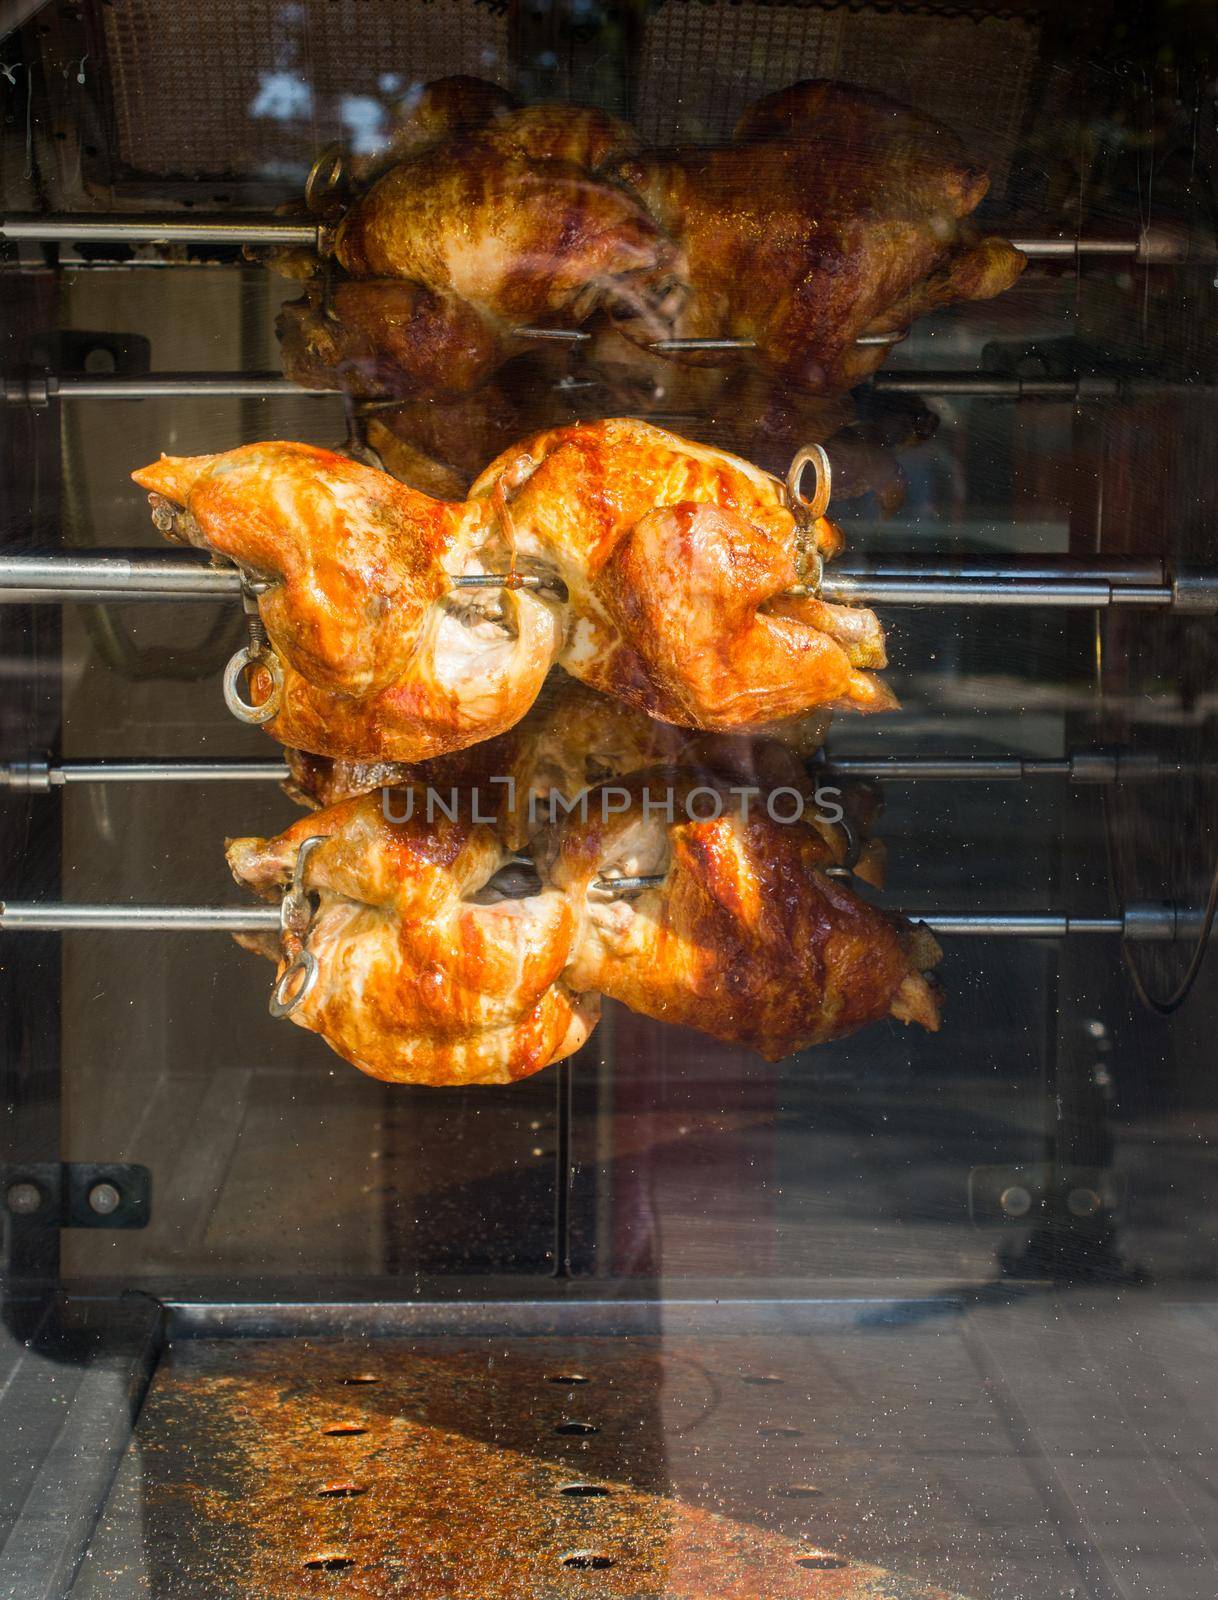 Chickens being grilled on metal spin in display by berkay